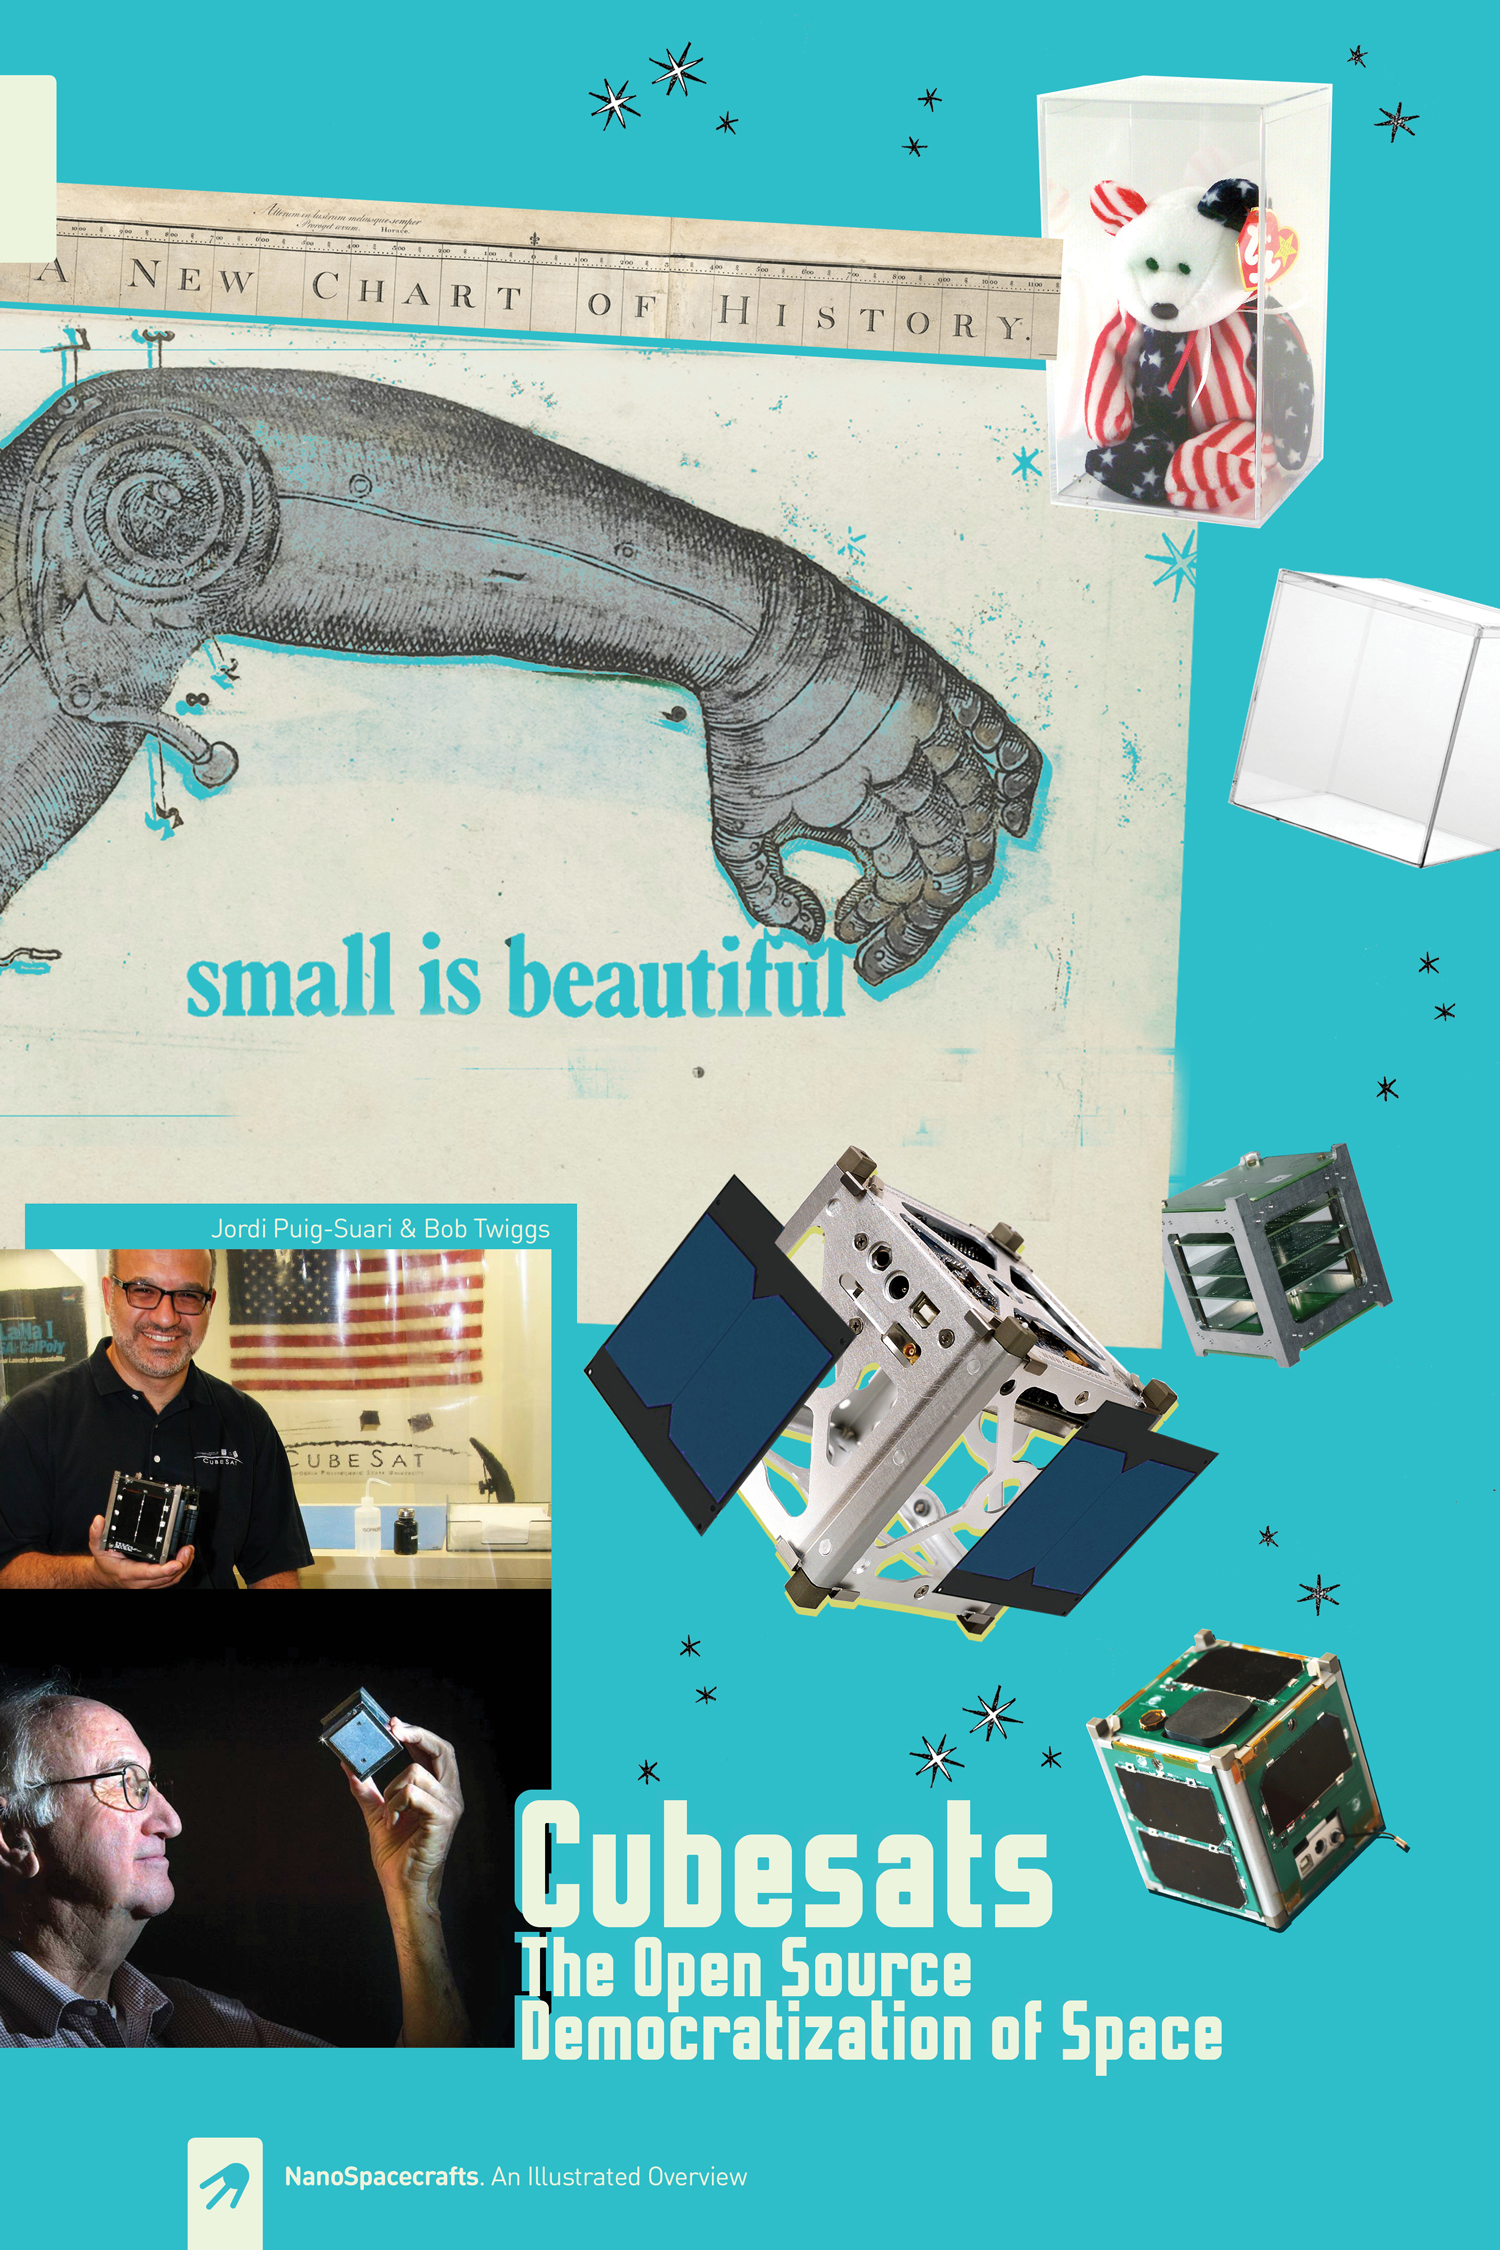 CUBESATS The Open Source Democratization of Space